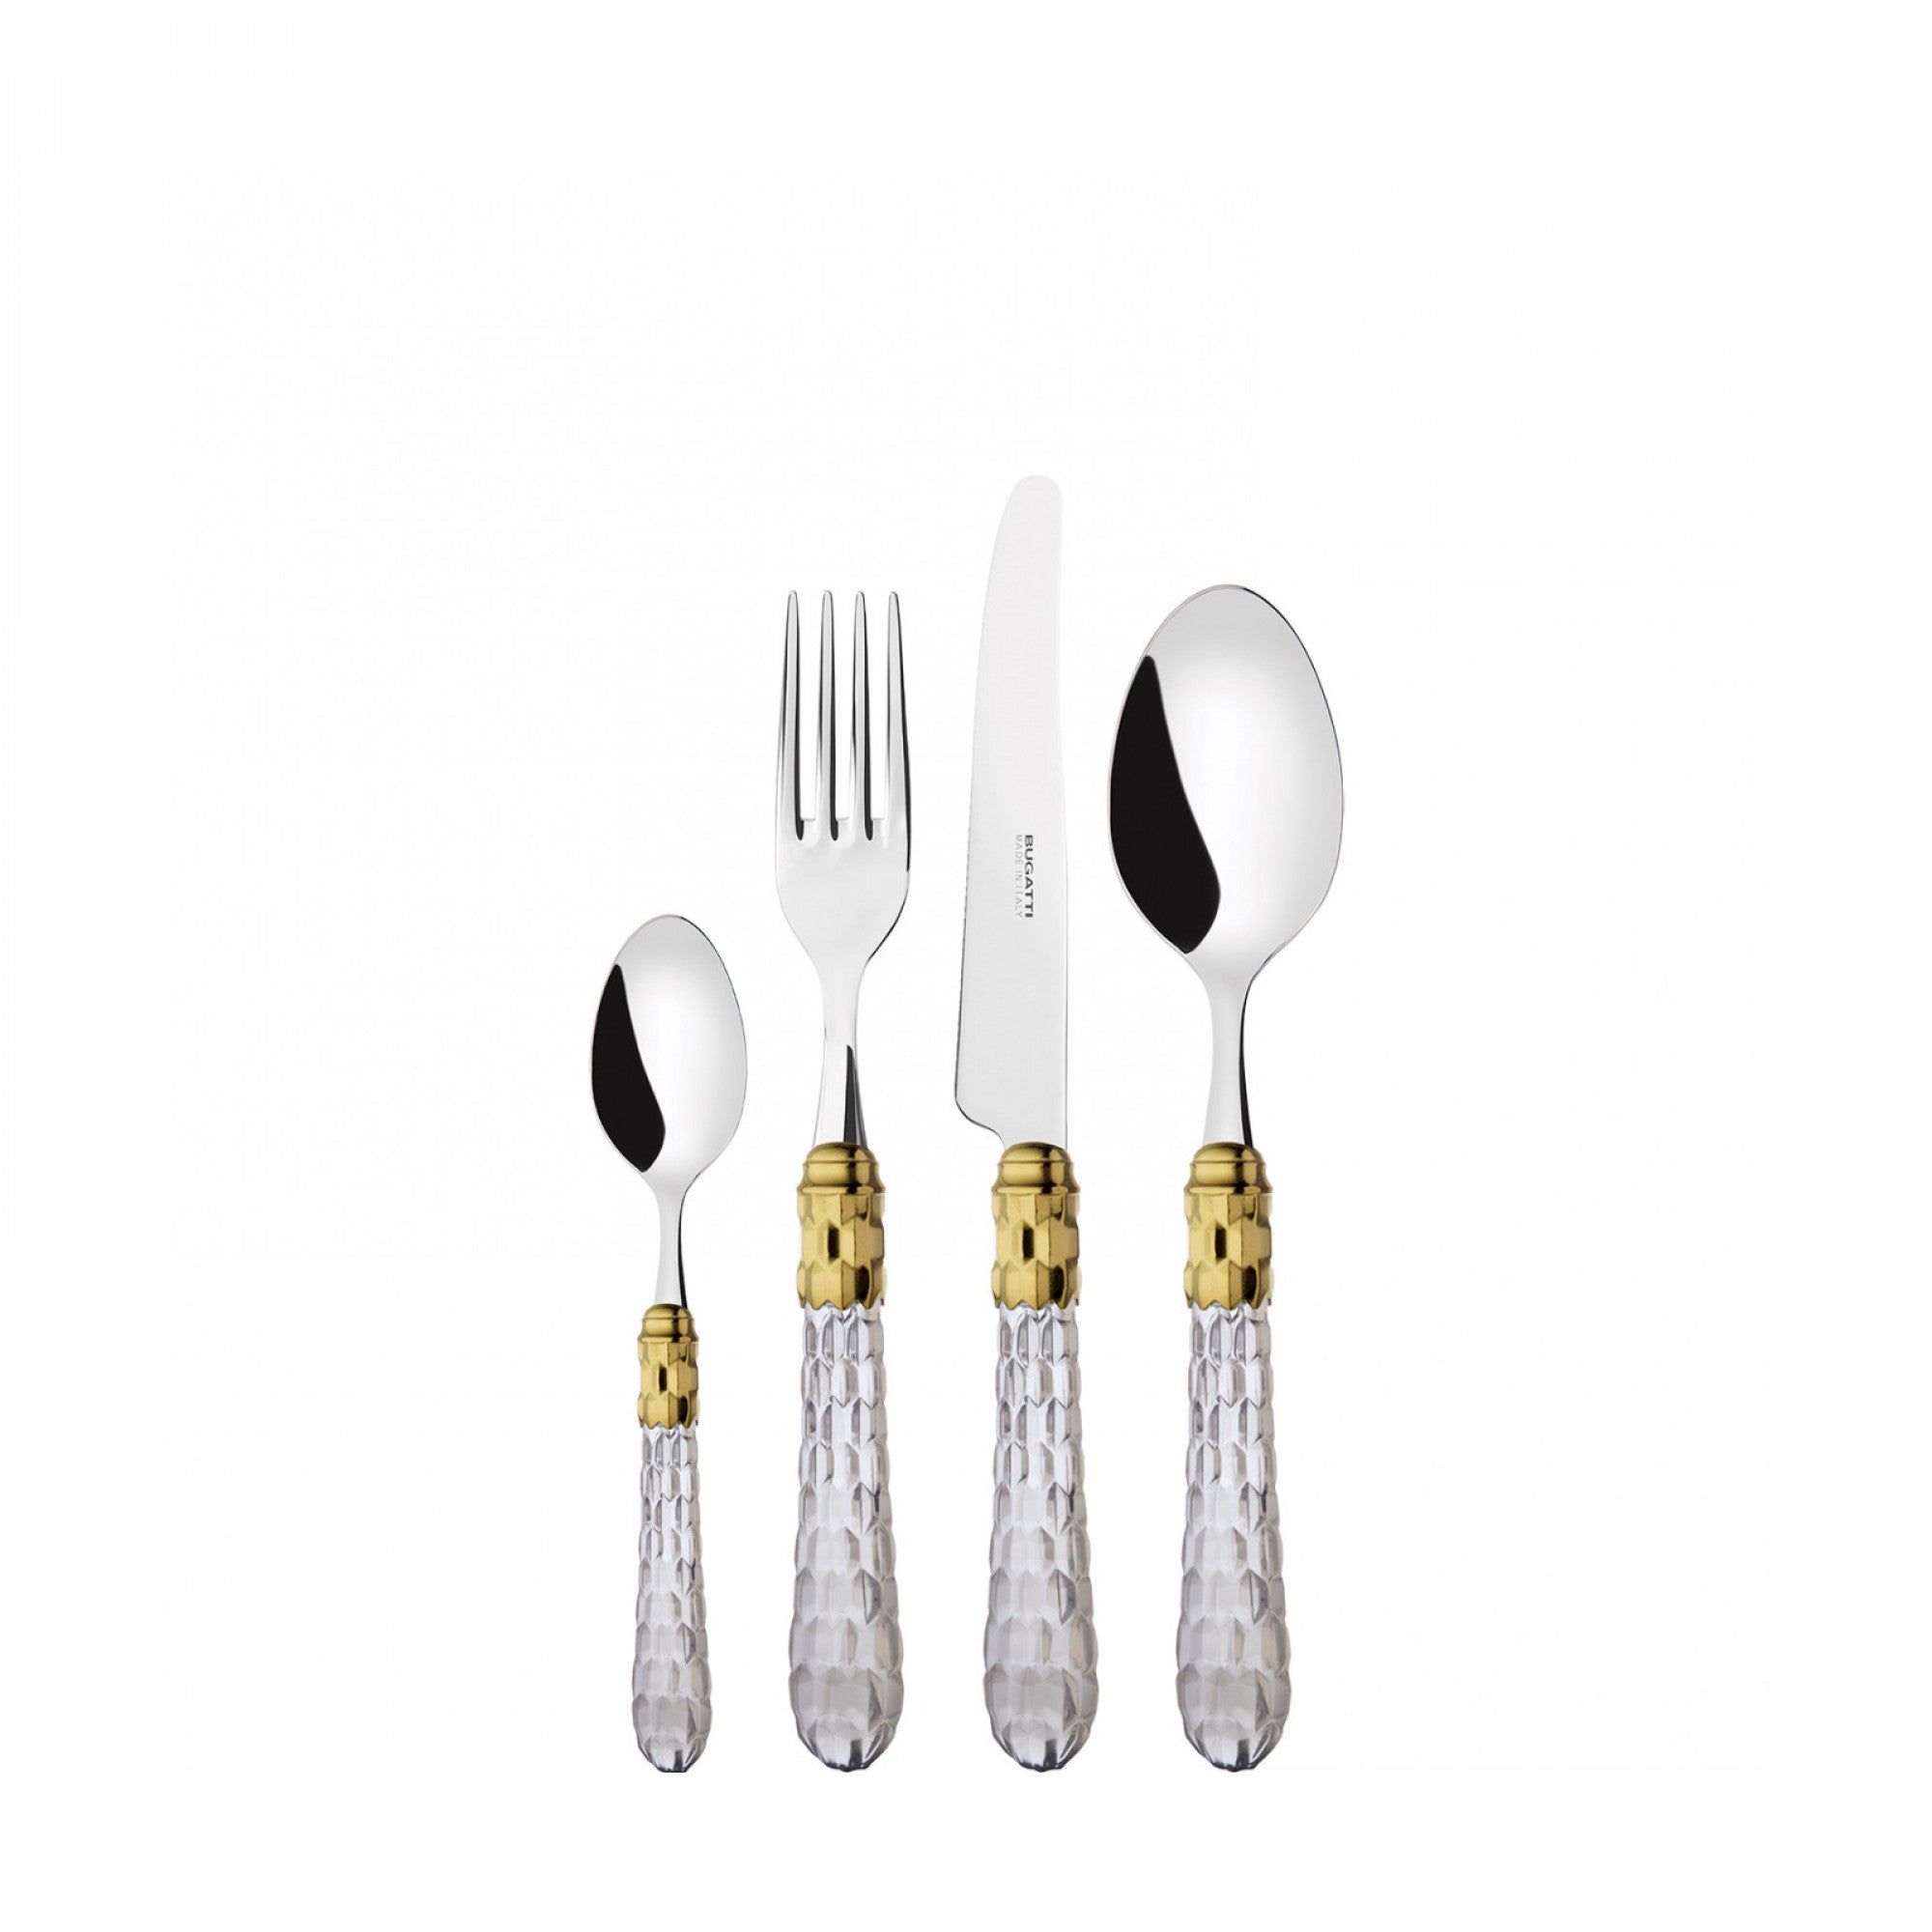 BUGATTI, Cristallo, 75-piece cutlery set in 18/10 stainless steel with golden ring. Packaged in wooden case with wengé finish